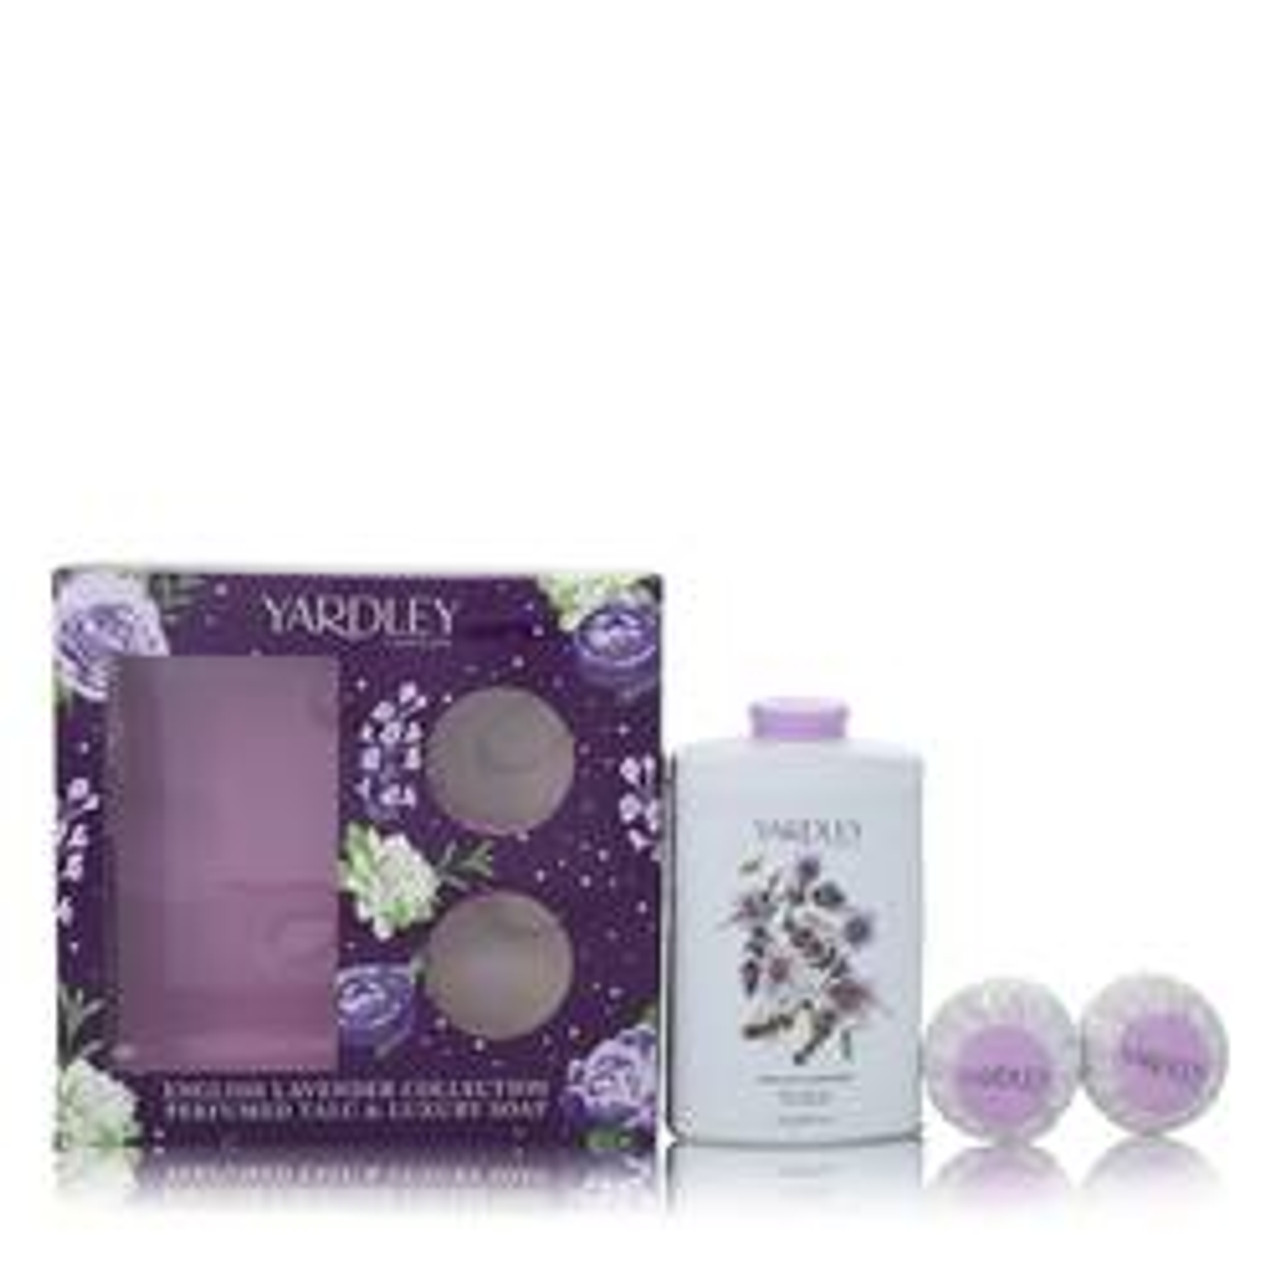 English Lavender Perfume By Yardley London Gift Set 7 oz for Women - [From 47.00 - Choose pk Qty ] - *Ships from Miami